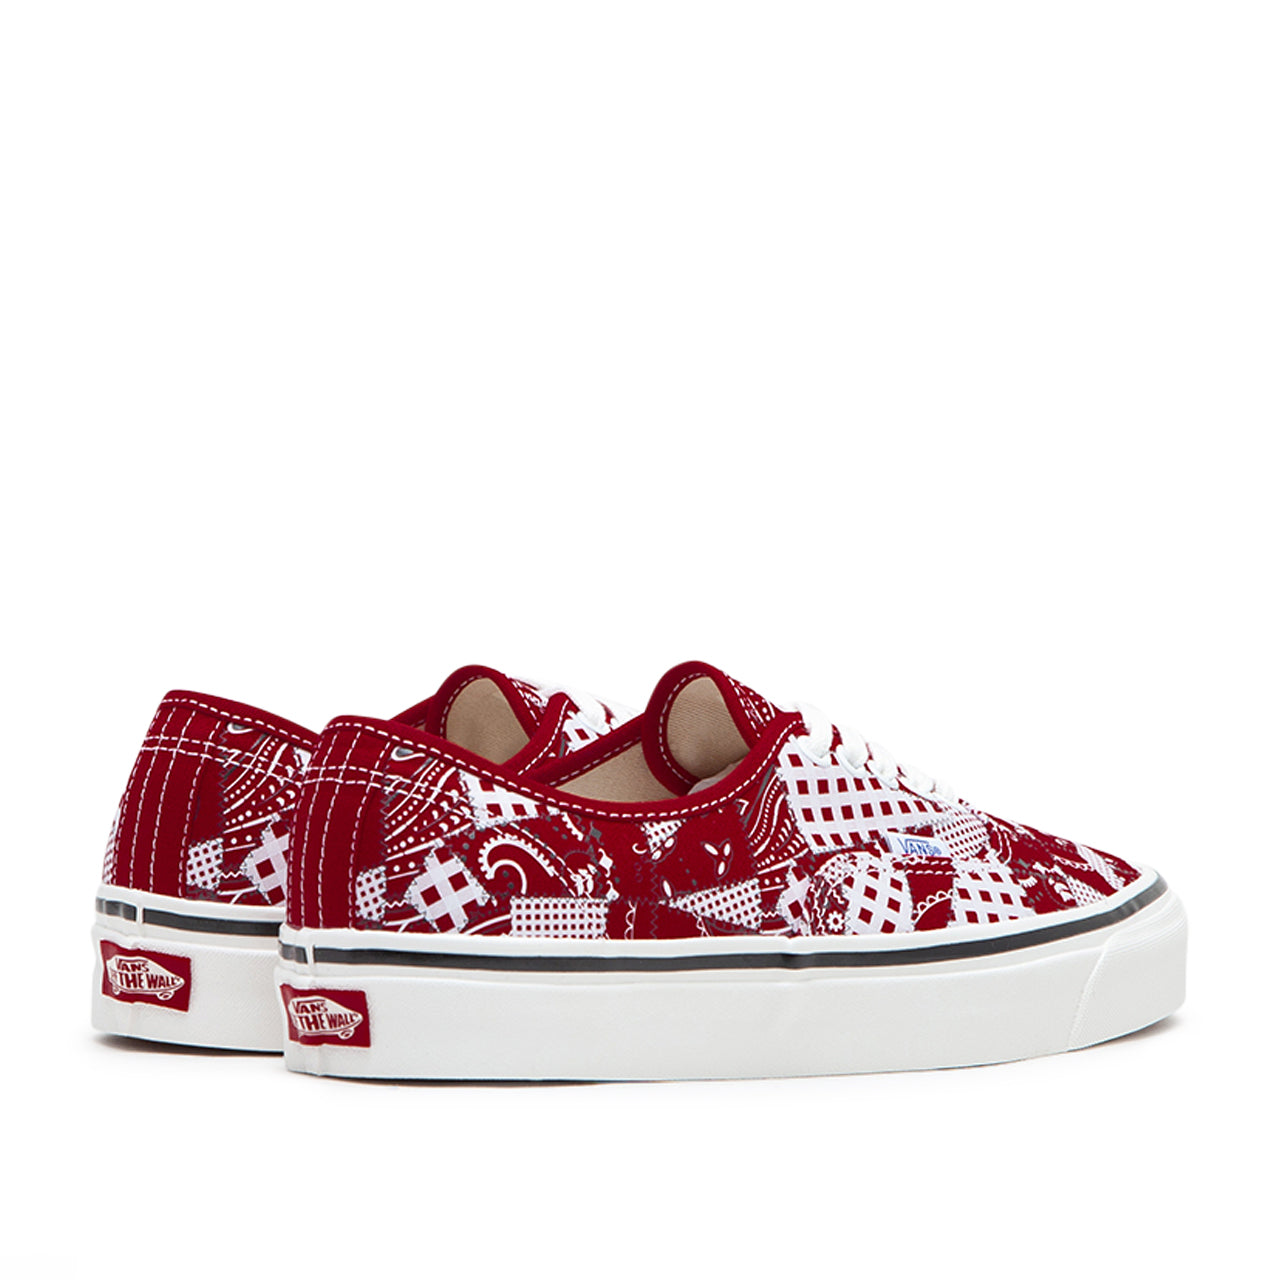 Vans UA Authentic 44DX Anaheim Factory WP (Rot / Weiß)  - Allike Store